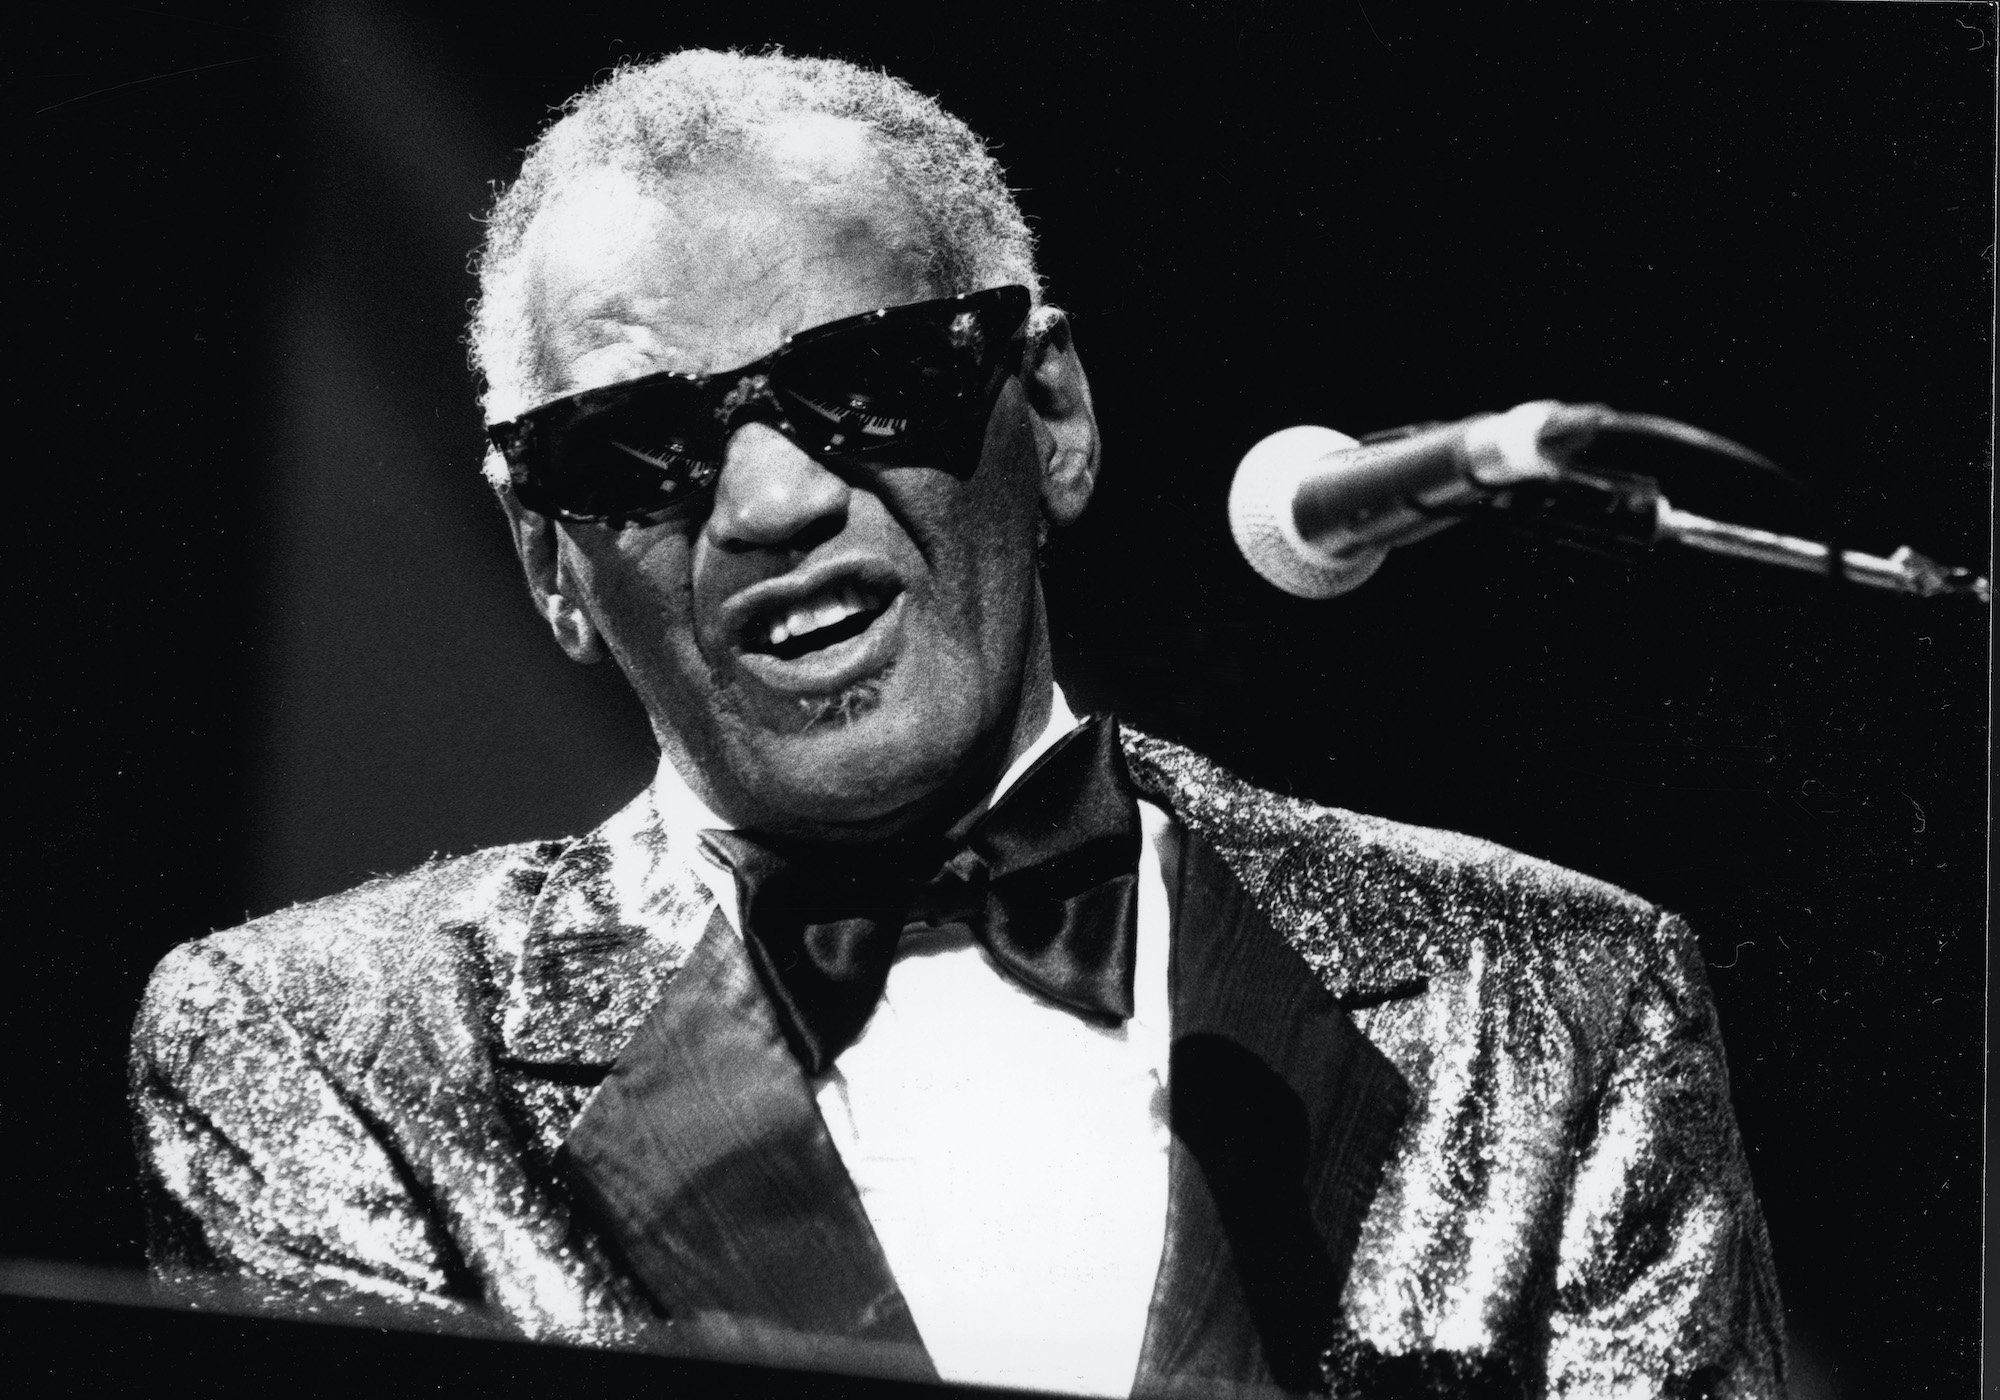 Ray Charles playing piano, singing into a microphone